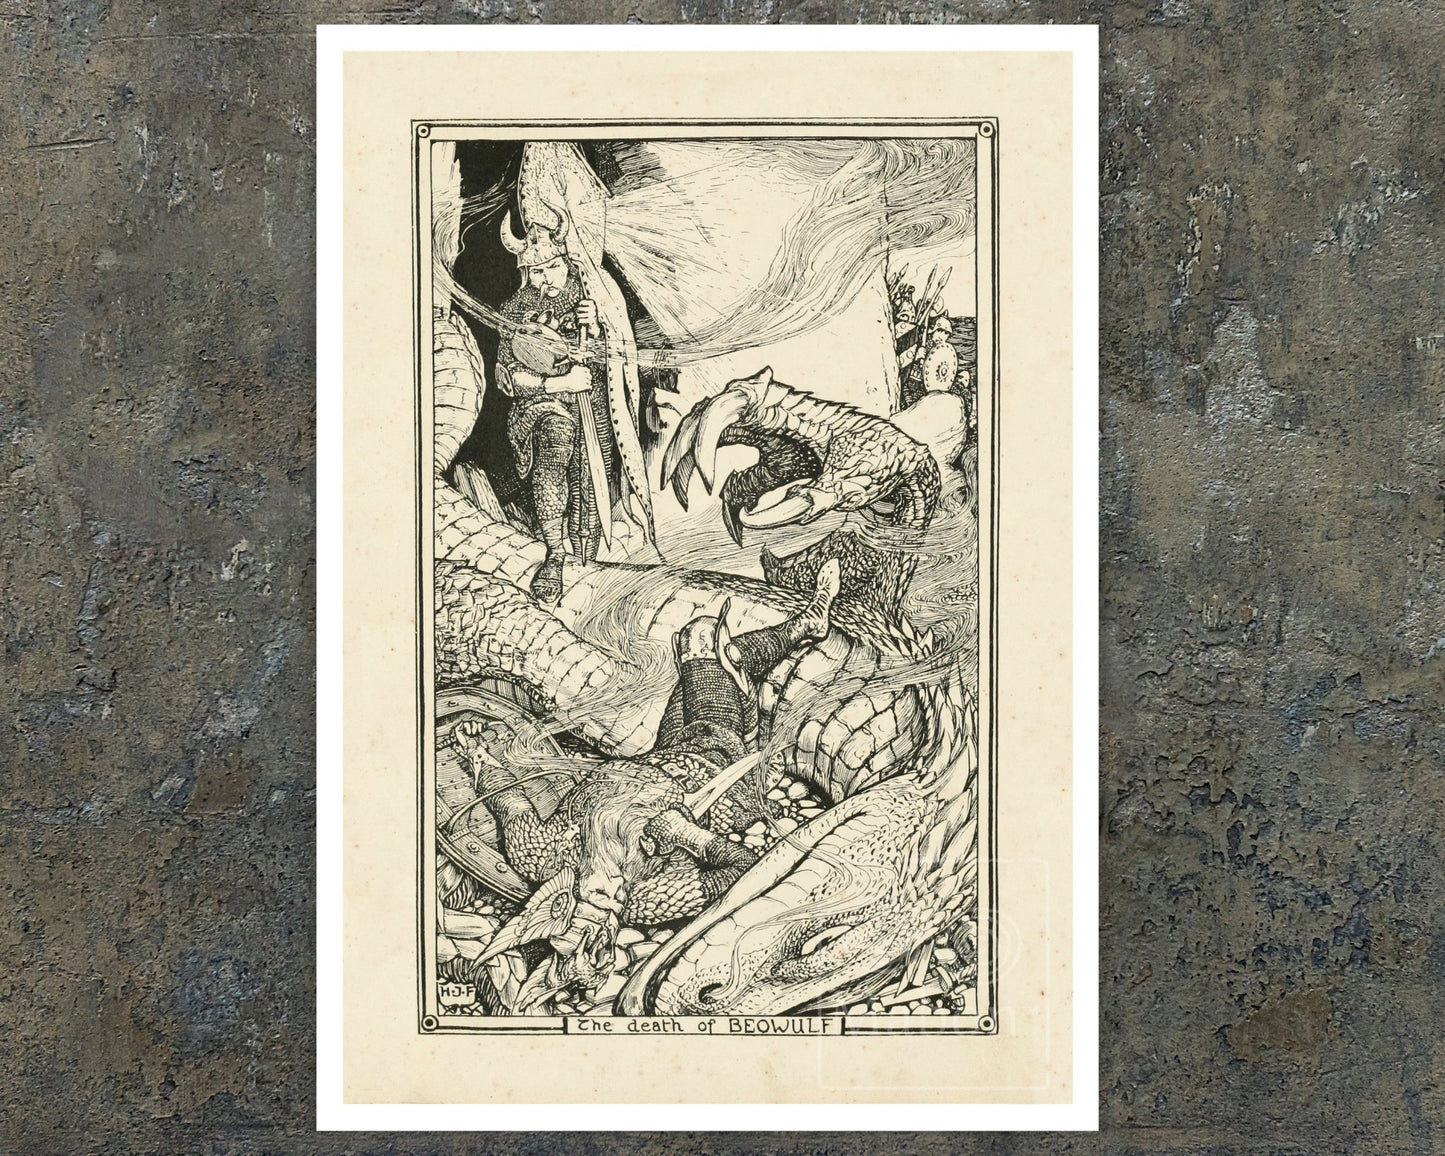 Henry Justice Ford "The Death of Beowulf" (c.1899) - Mabon Gallery